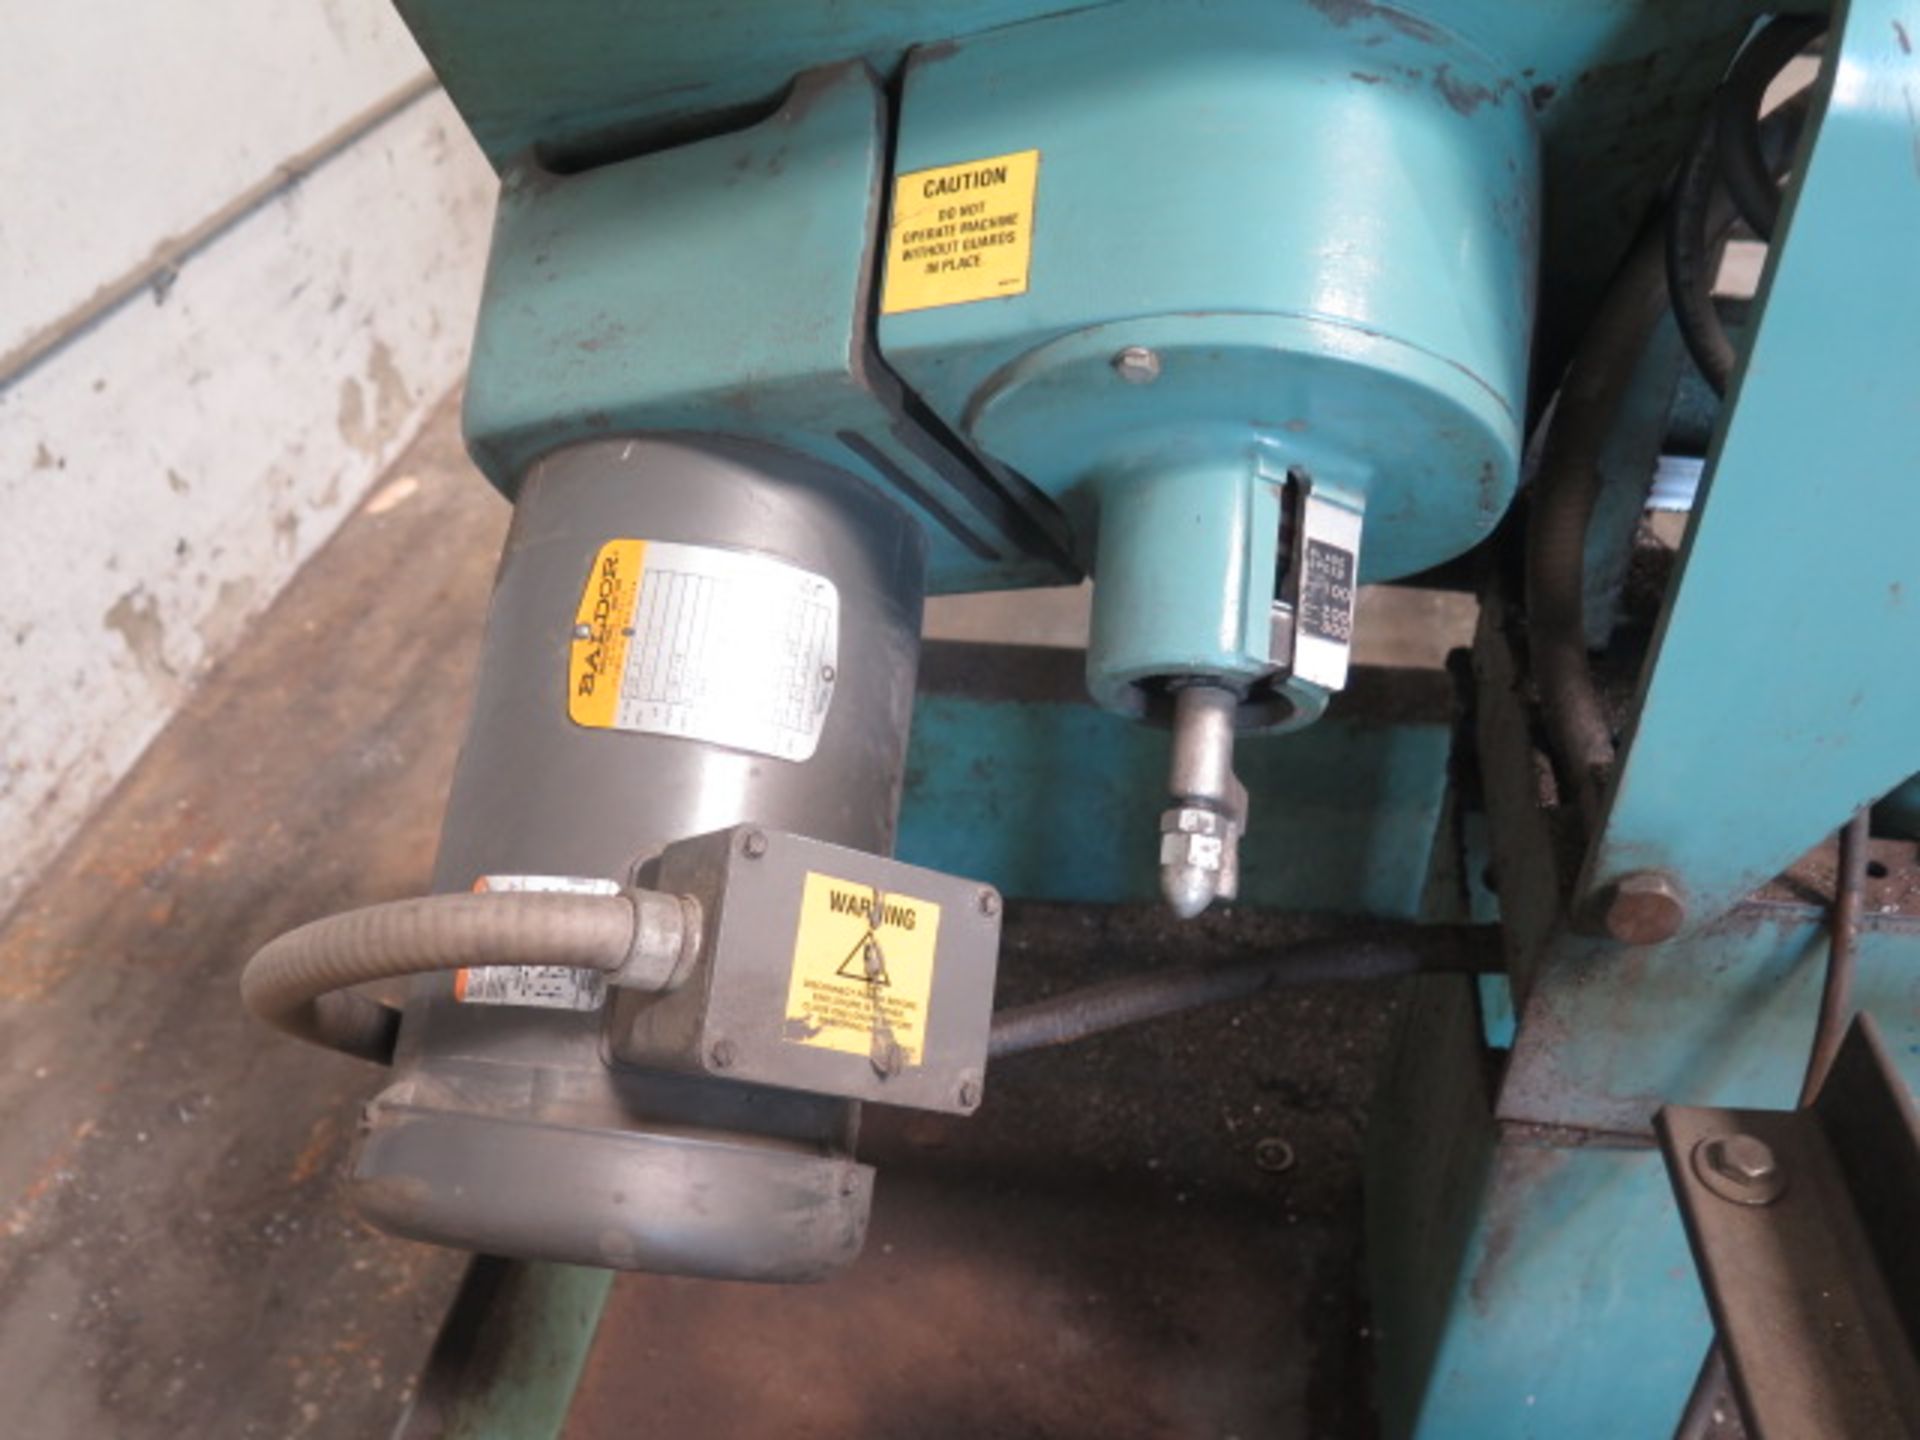 W.F.Wells mdl. L-10 10” Horizontal Band Saw s/n L071384 w/ Manual Clamping, Coolant, Conveyors - Image 7 of 9